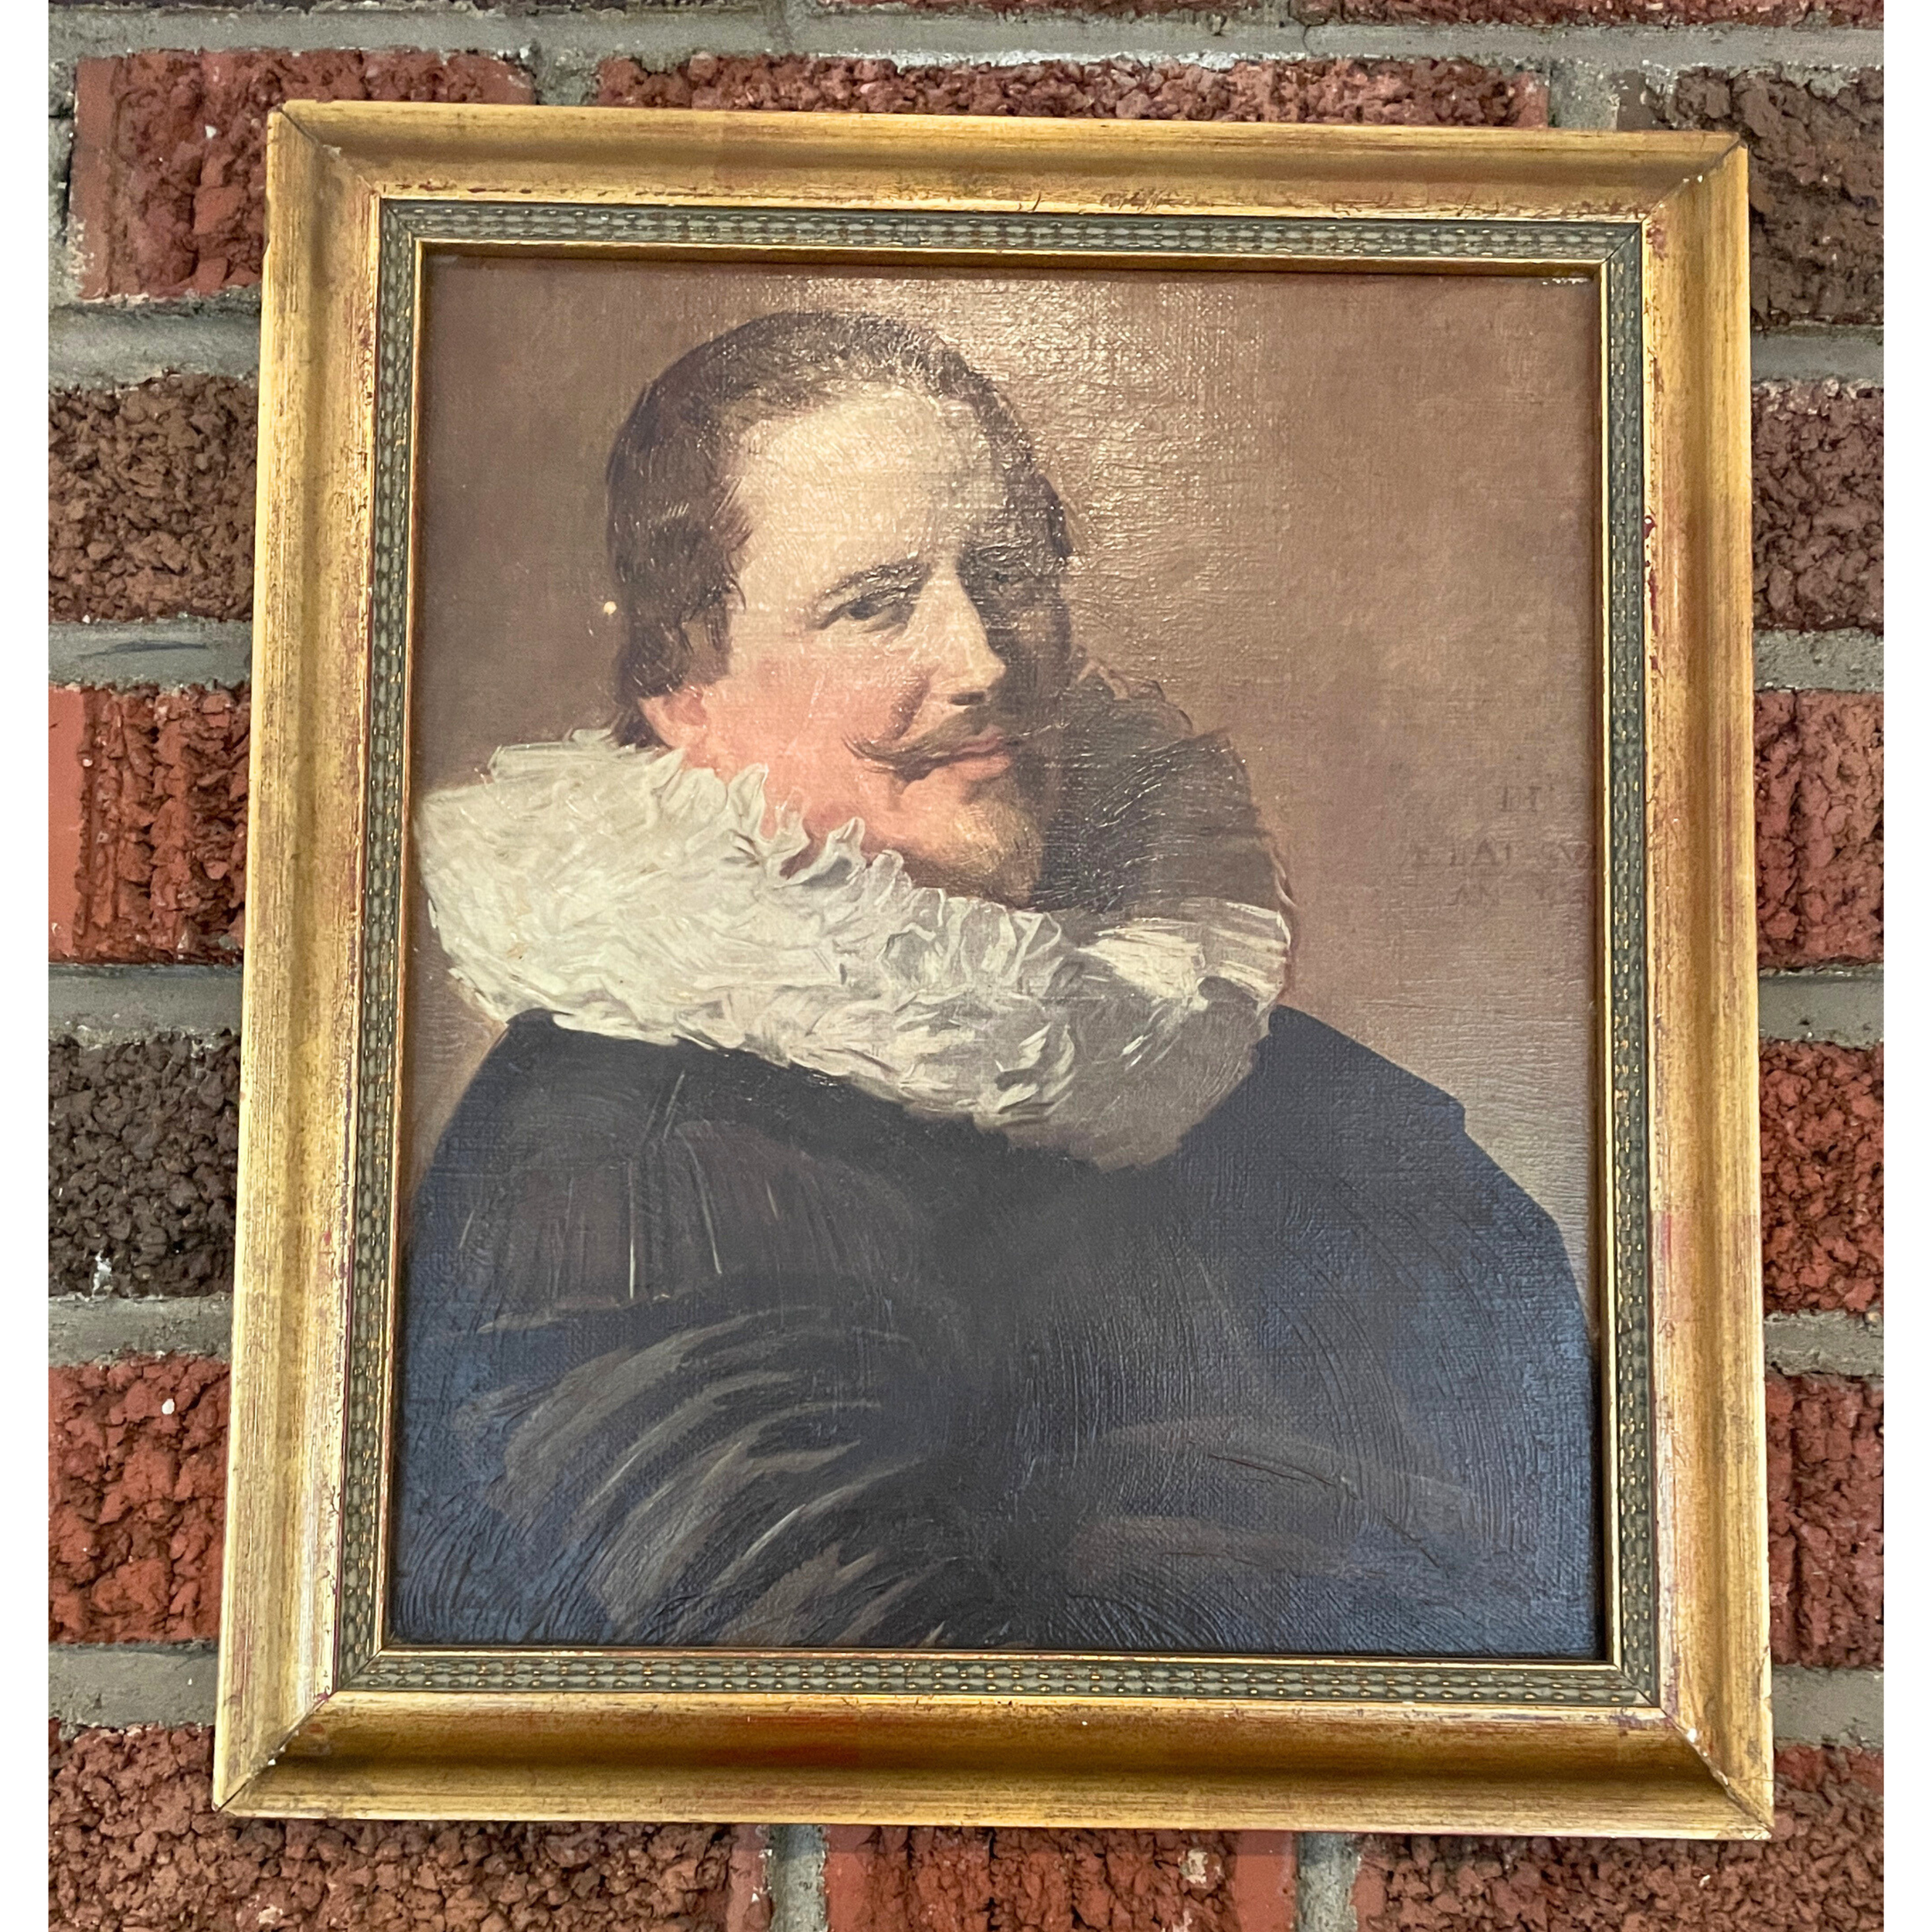 Framed Copy of "Portrait of a Man in his Thirties" by Frans Hals 